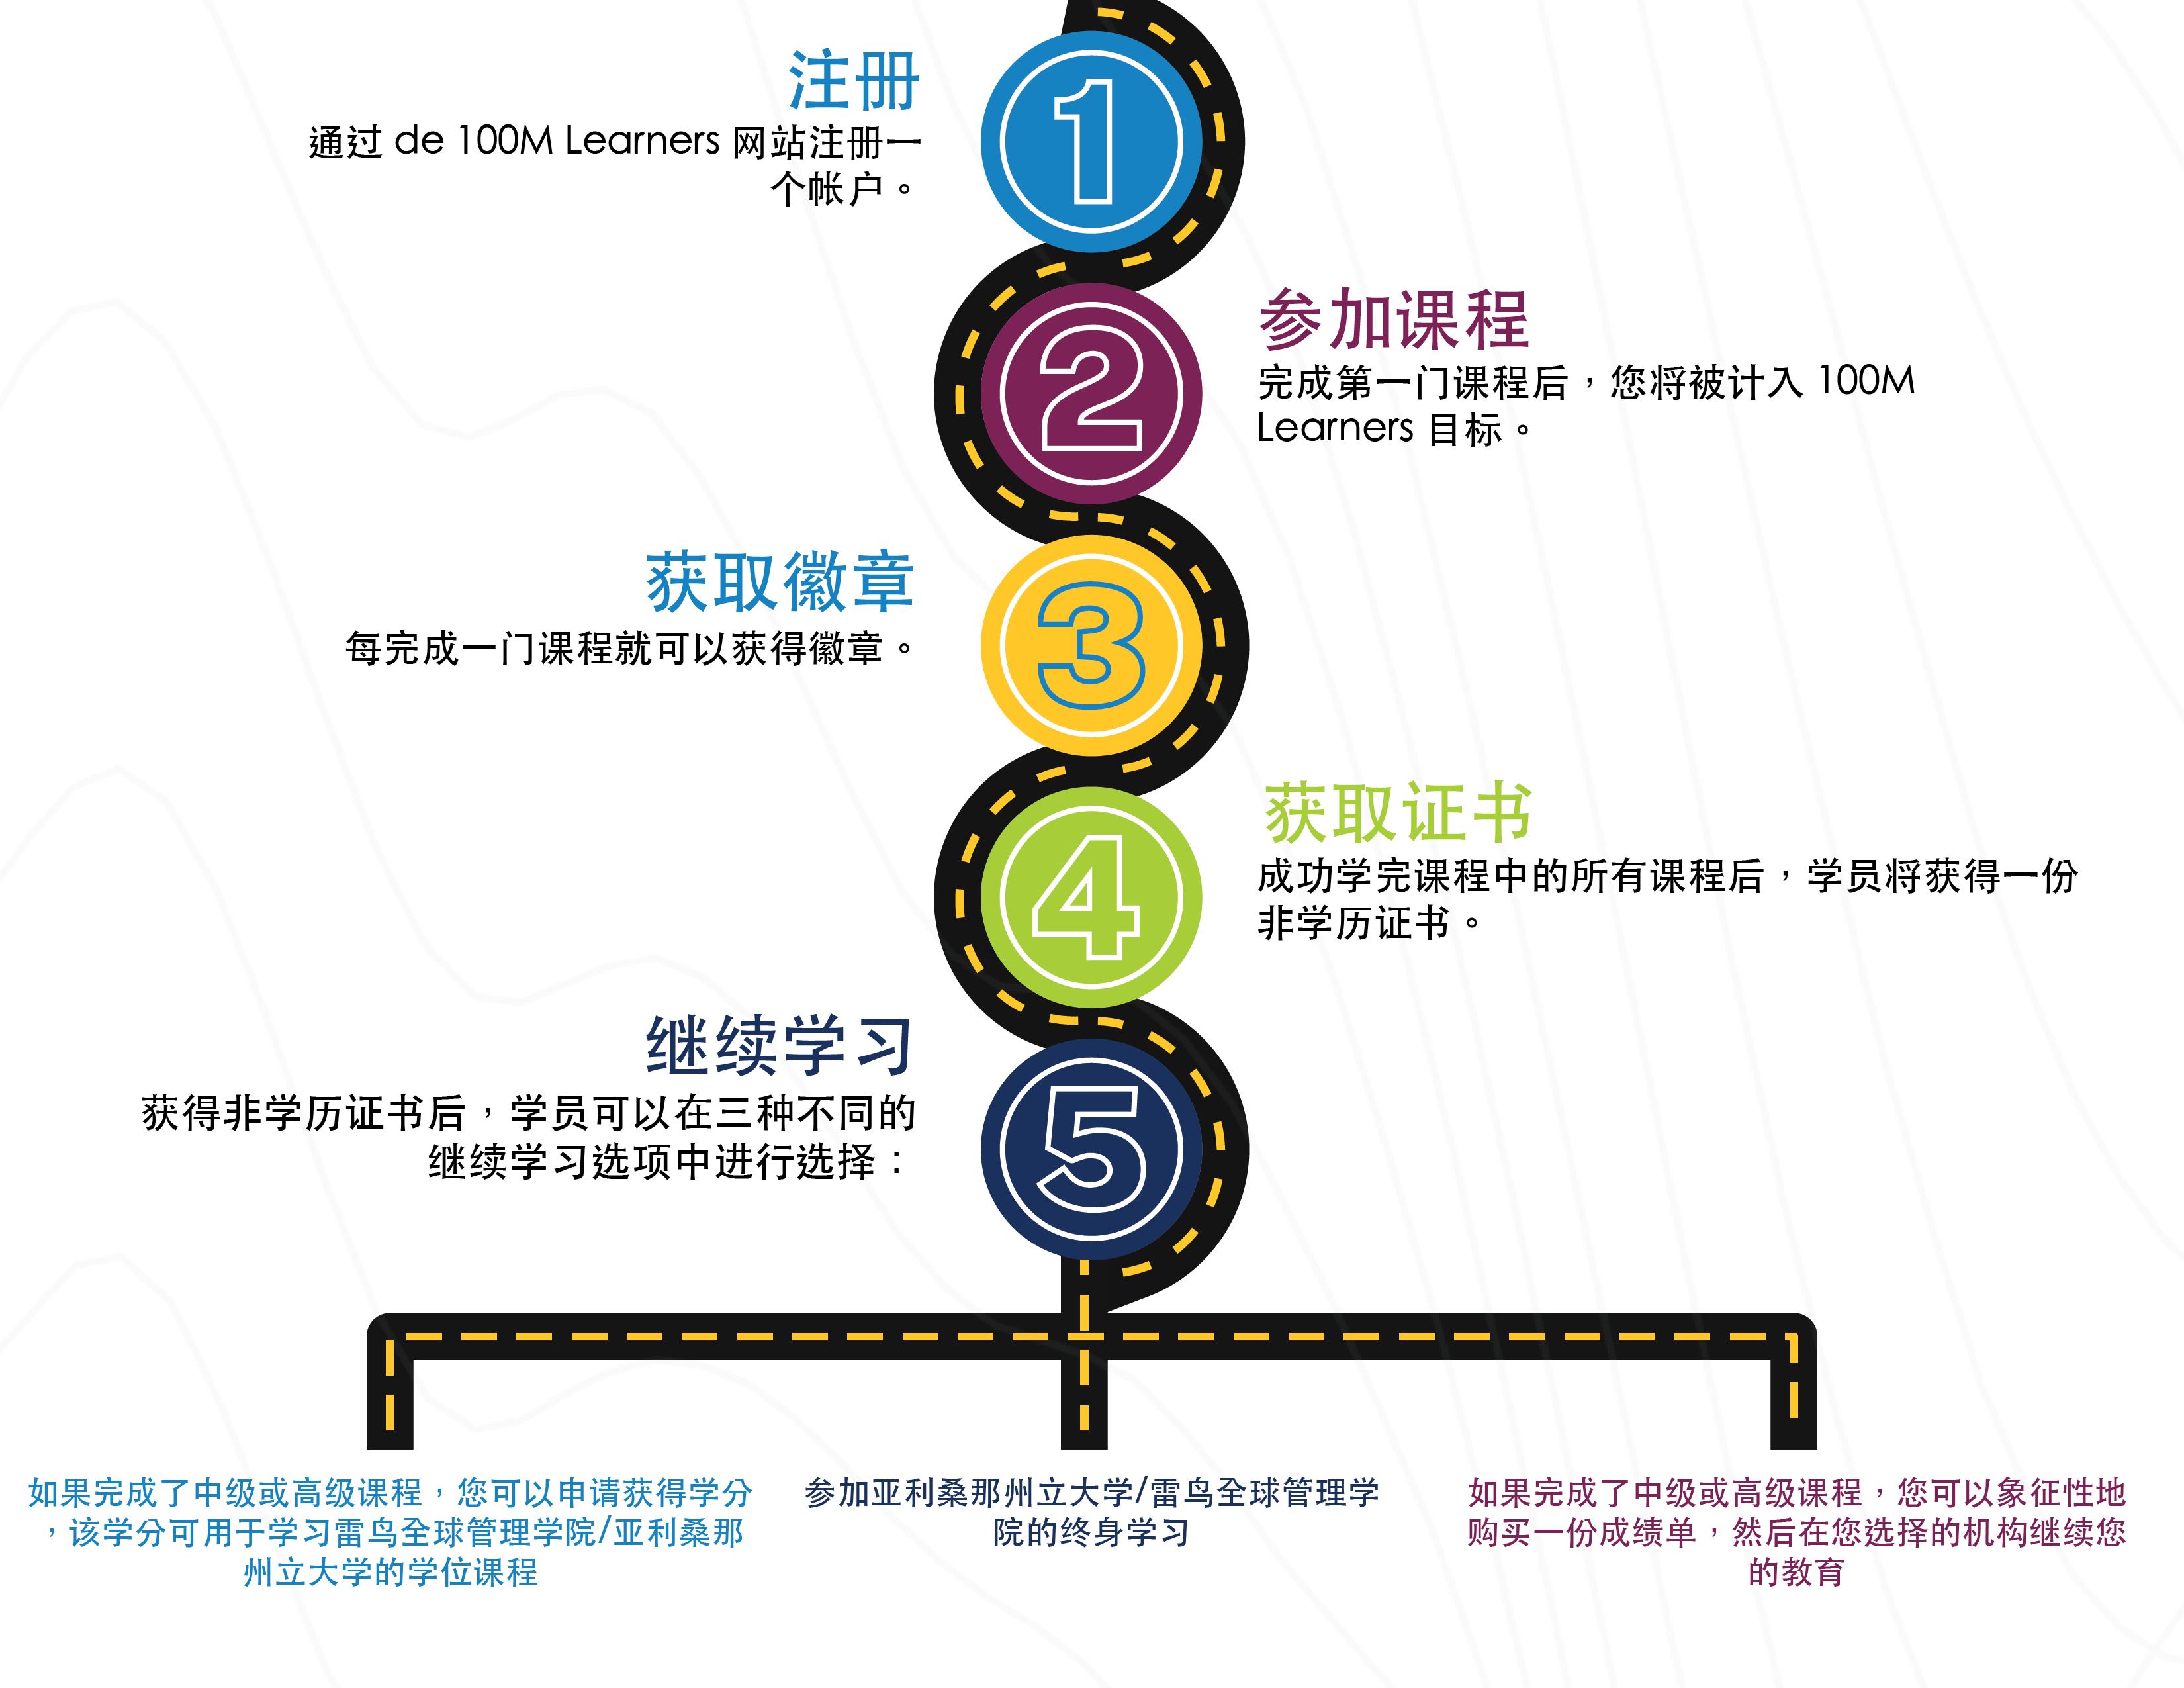 Graphic depicting the 5 steps of the 100ML process.